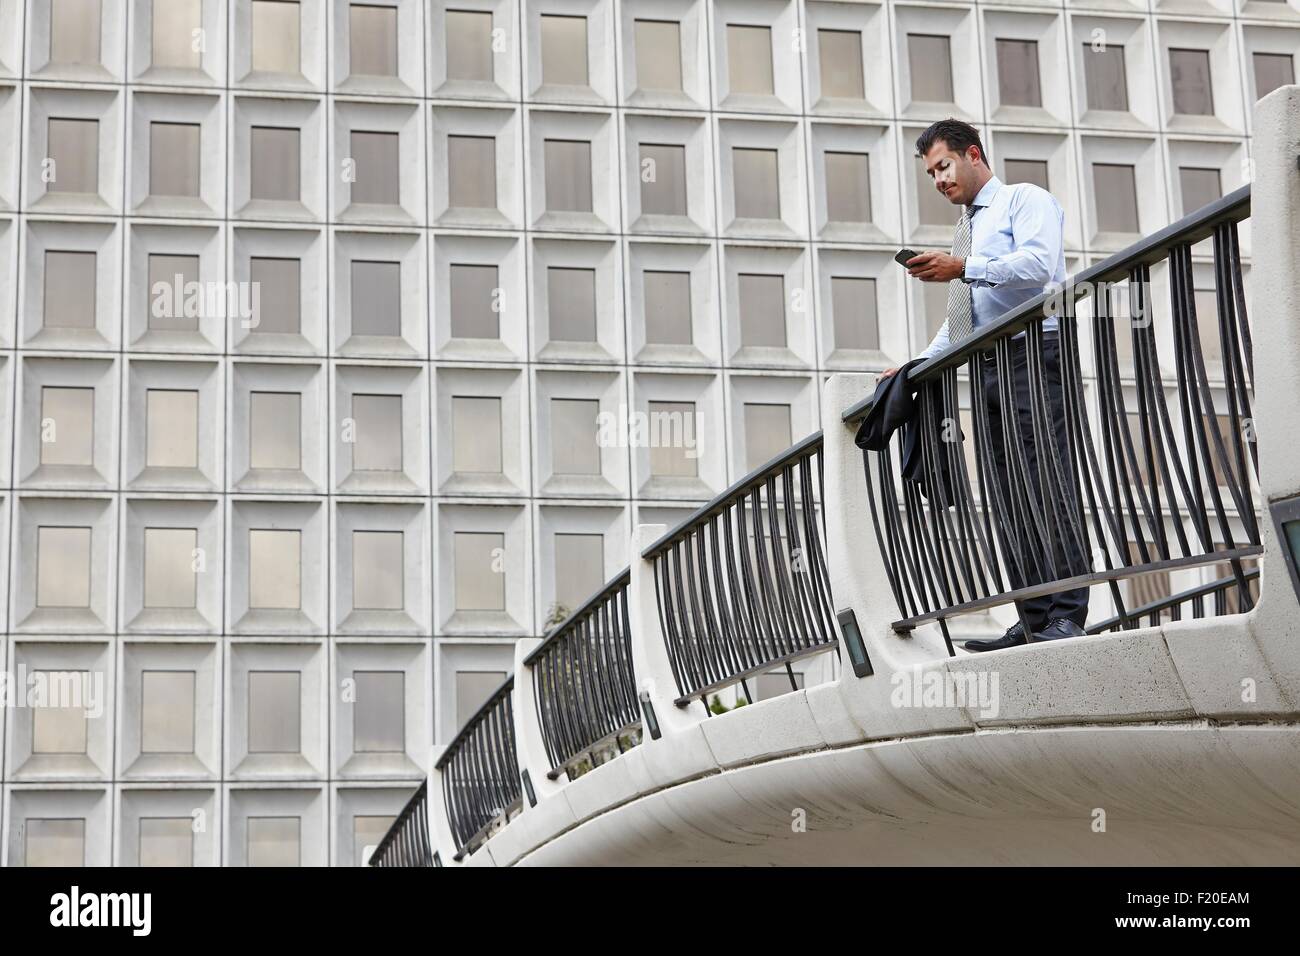 Mid adult business man standing on elevated walkway looking at smartphone Stock Photo